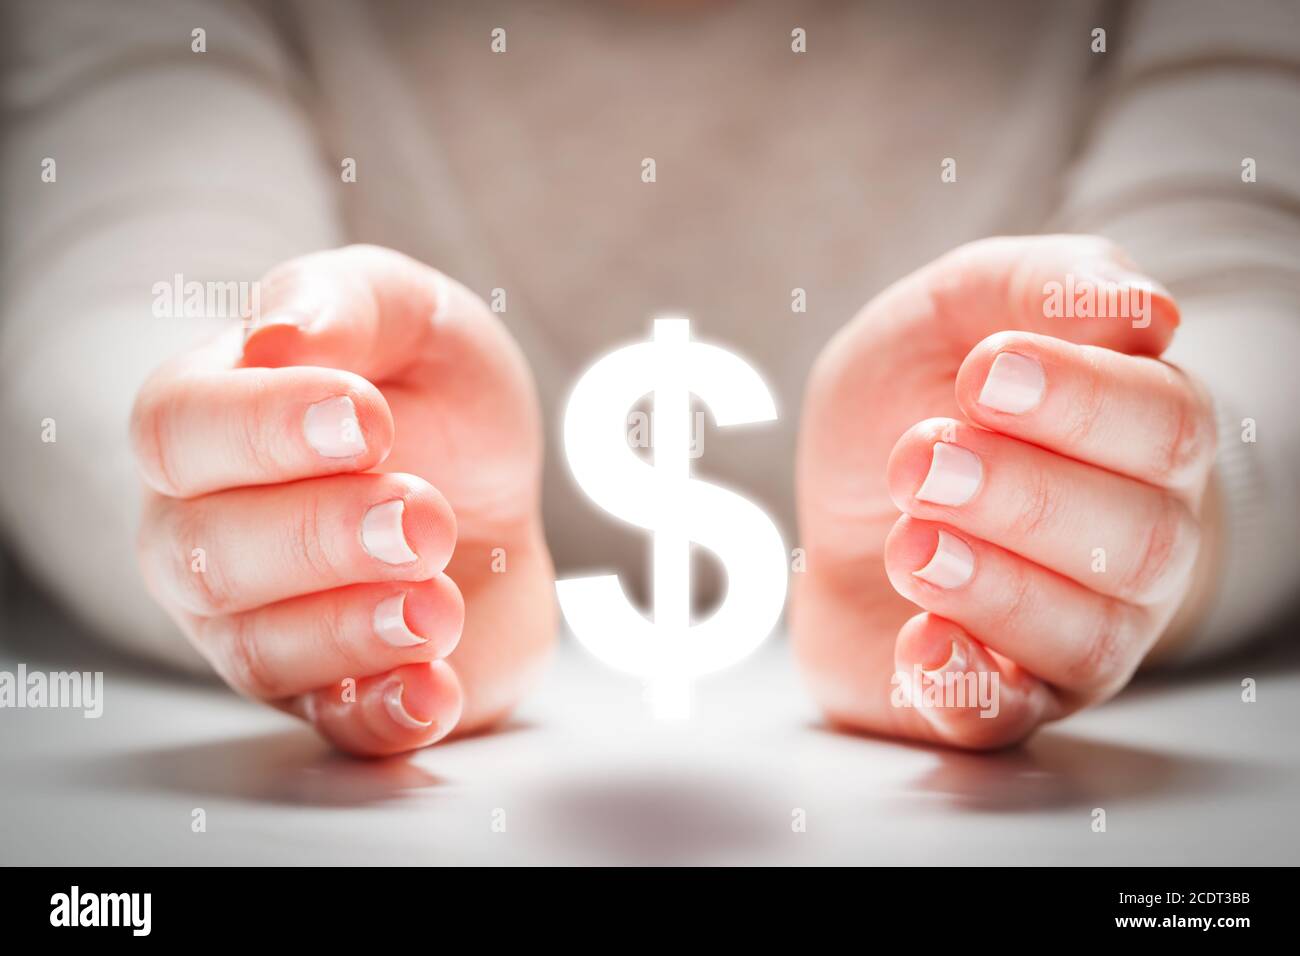 Dollar sign between woman#39;s hands in gesture of protection. Currency stability Stock Photo